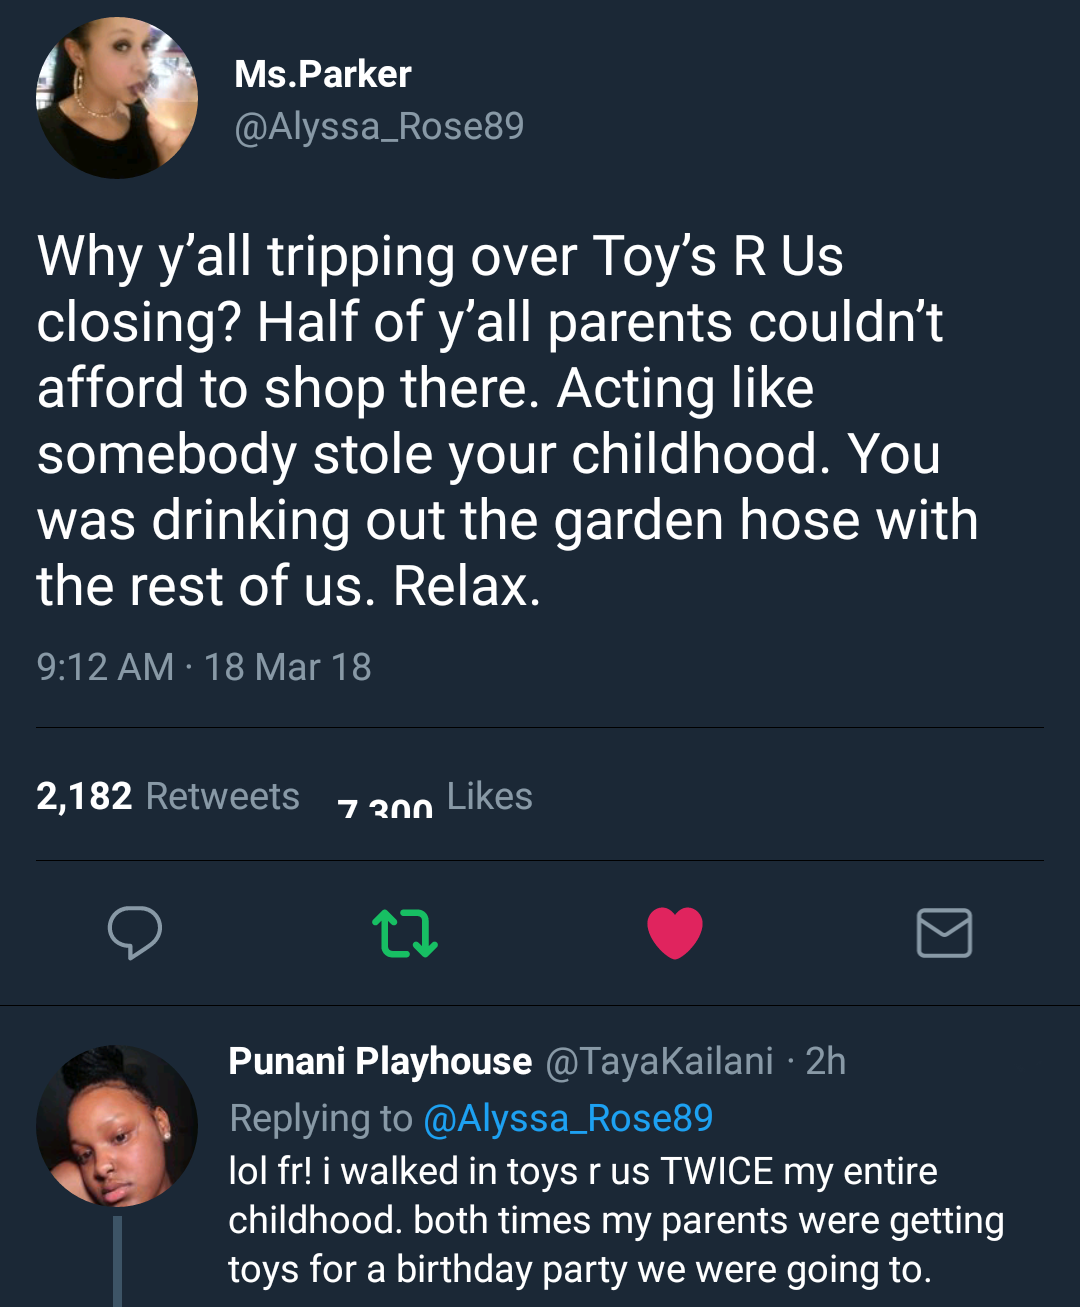 screenshot - Ms.Parker Ms.Parker Why y'all tripping over Toy's R Us closing? Half of y'all parents couldn't afford to shop there. Acting somebody stole your childhood. You was drinking out the garden hose with the rest of us. Relax. 18 Mar 18 2,182 7 200 